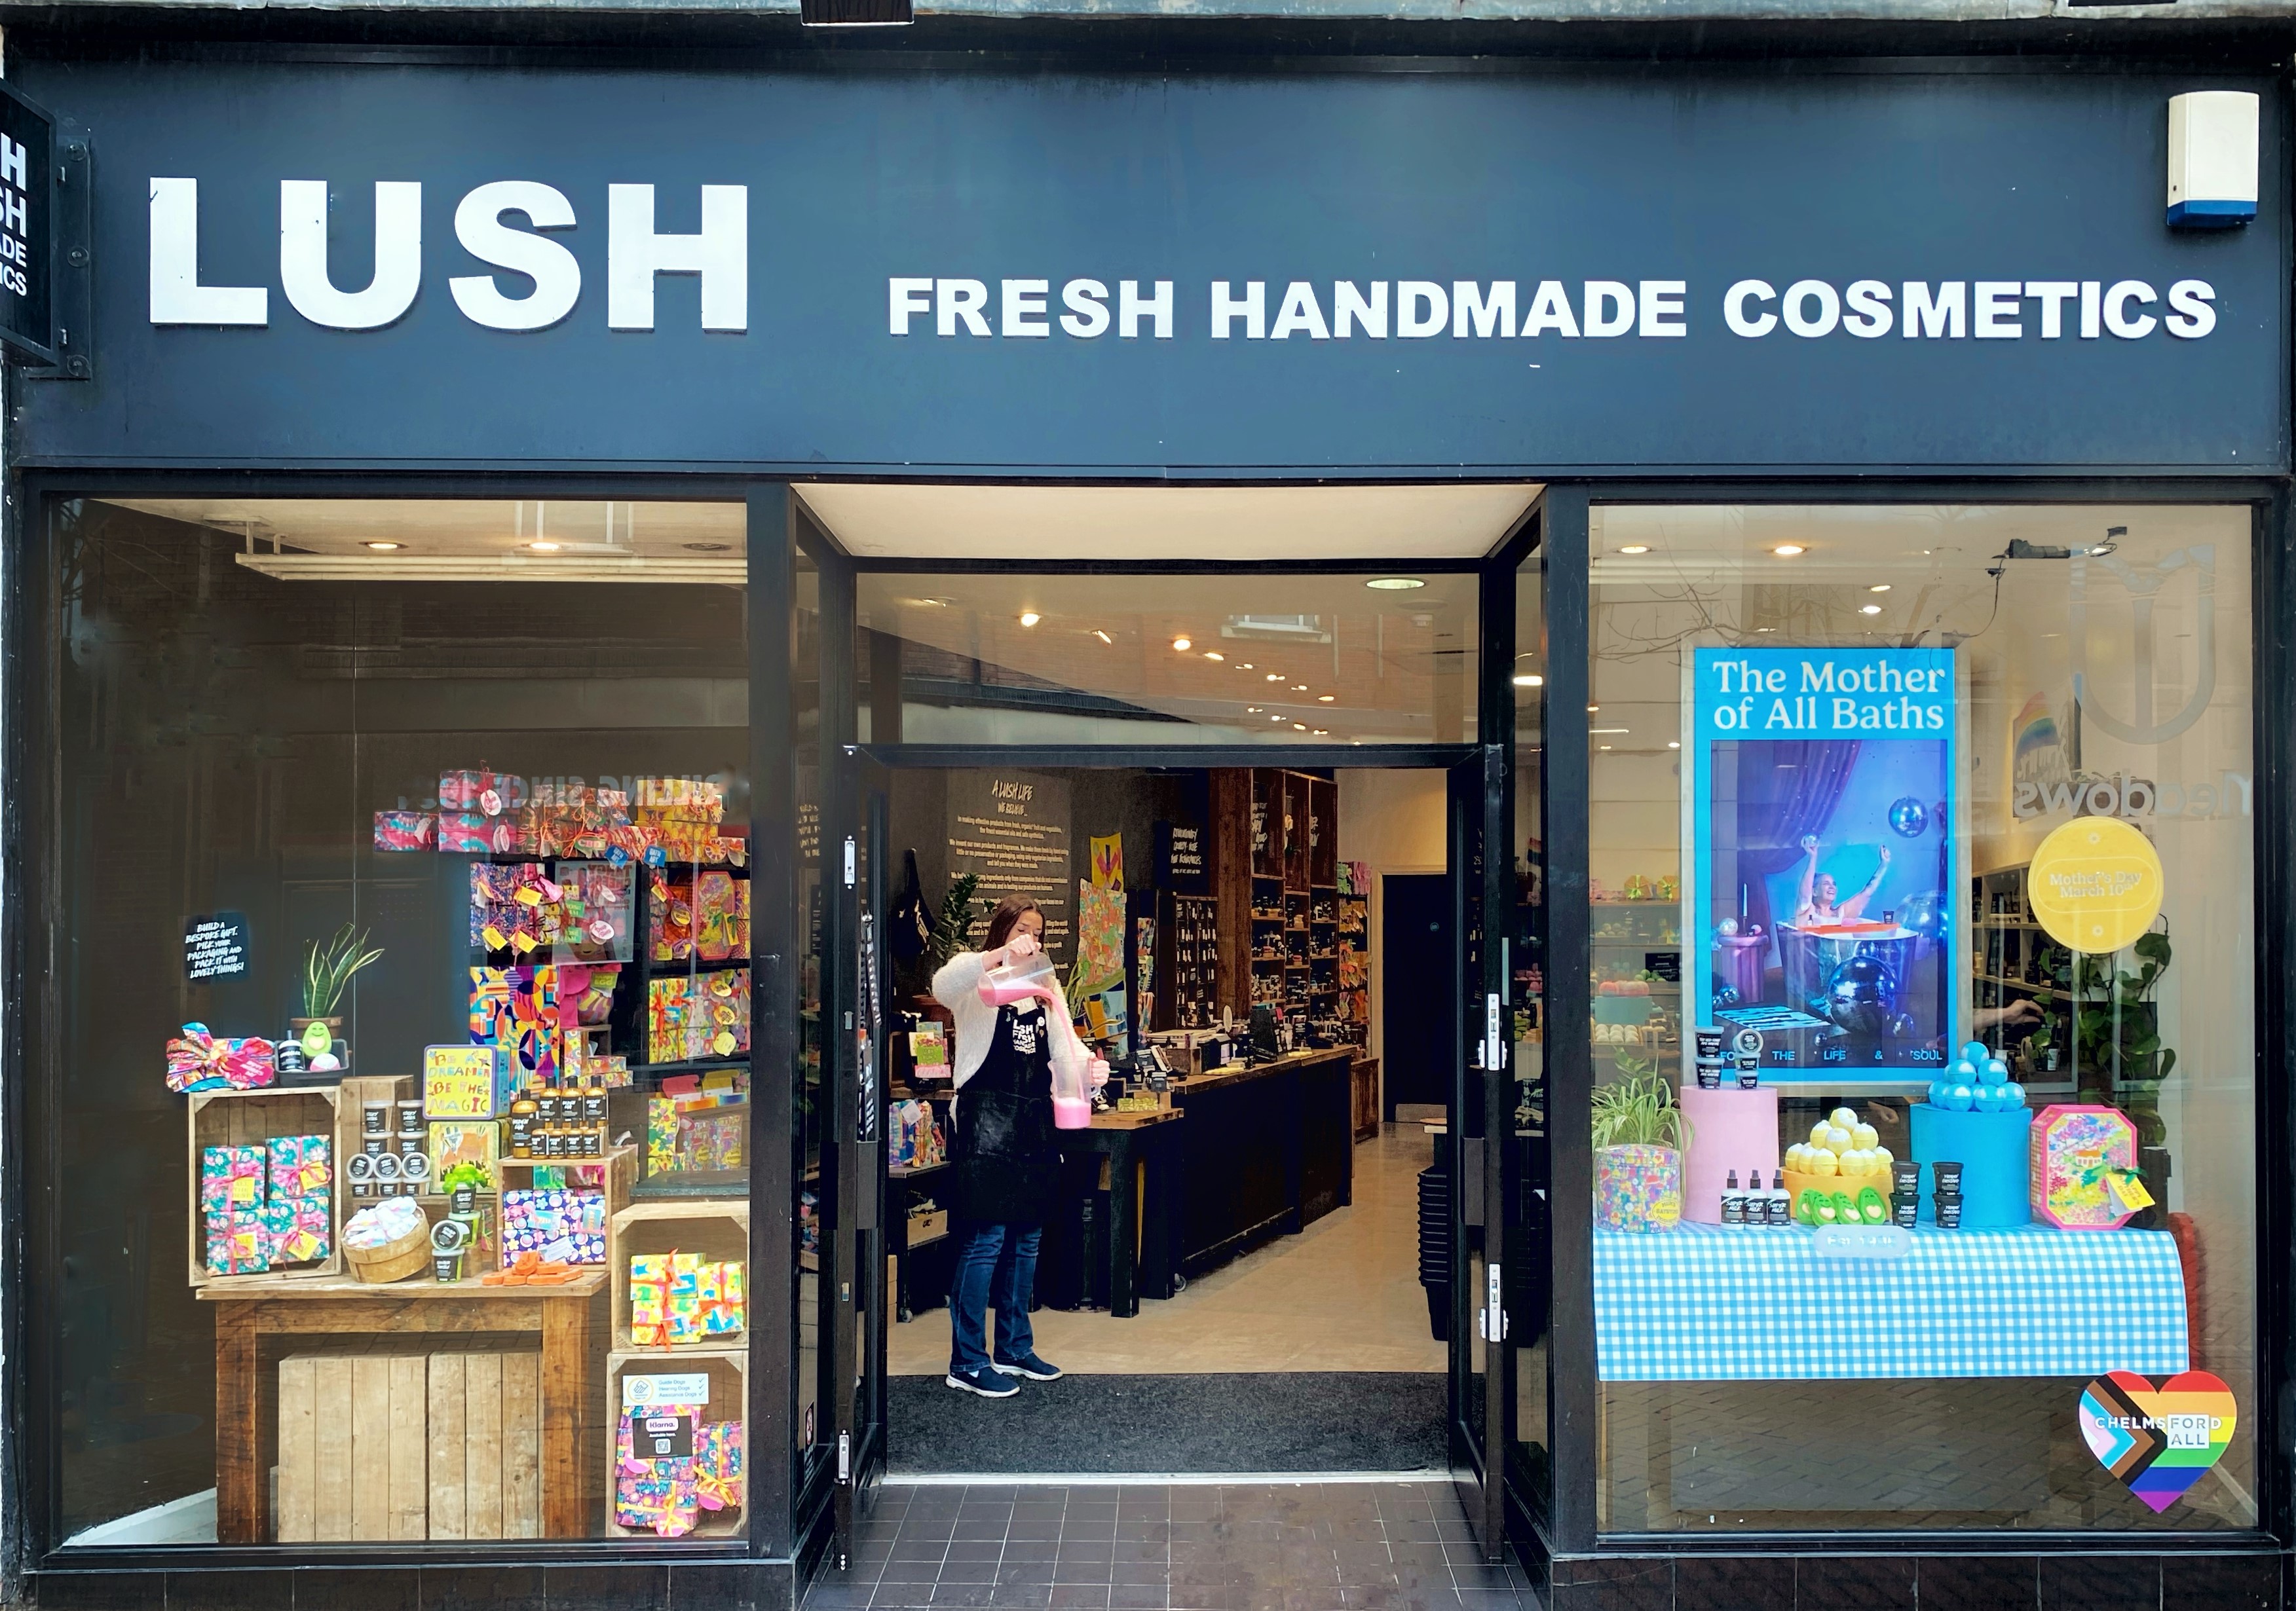 An image of Lush Chelmsford  from the outside of the store.  At the top of the image, "Lush Fresh Handmade cosmetics" is written in white text against a black background. On the left and right of the image, colourful Lush products are displayed in the window. A person is demoing bubble bars in bubble jugs at the front of the shop.